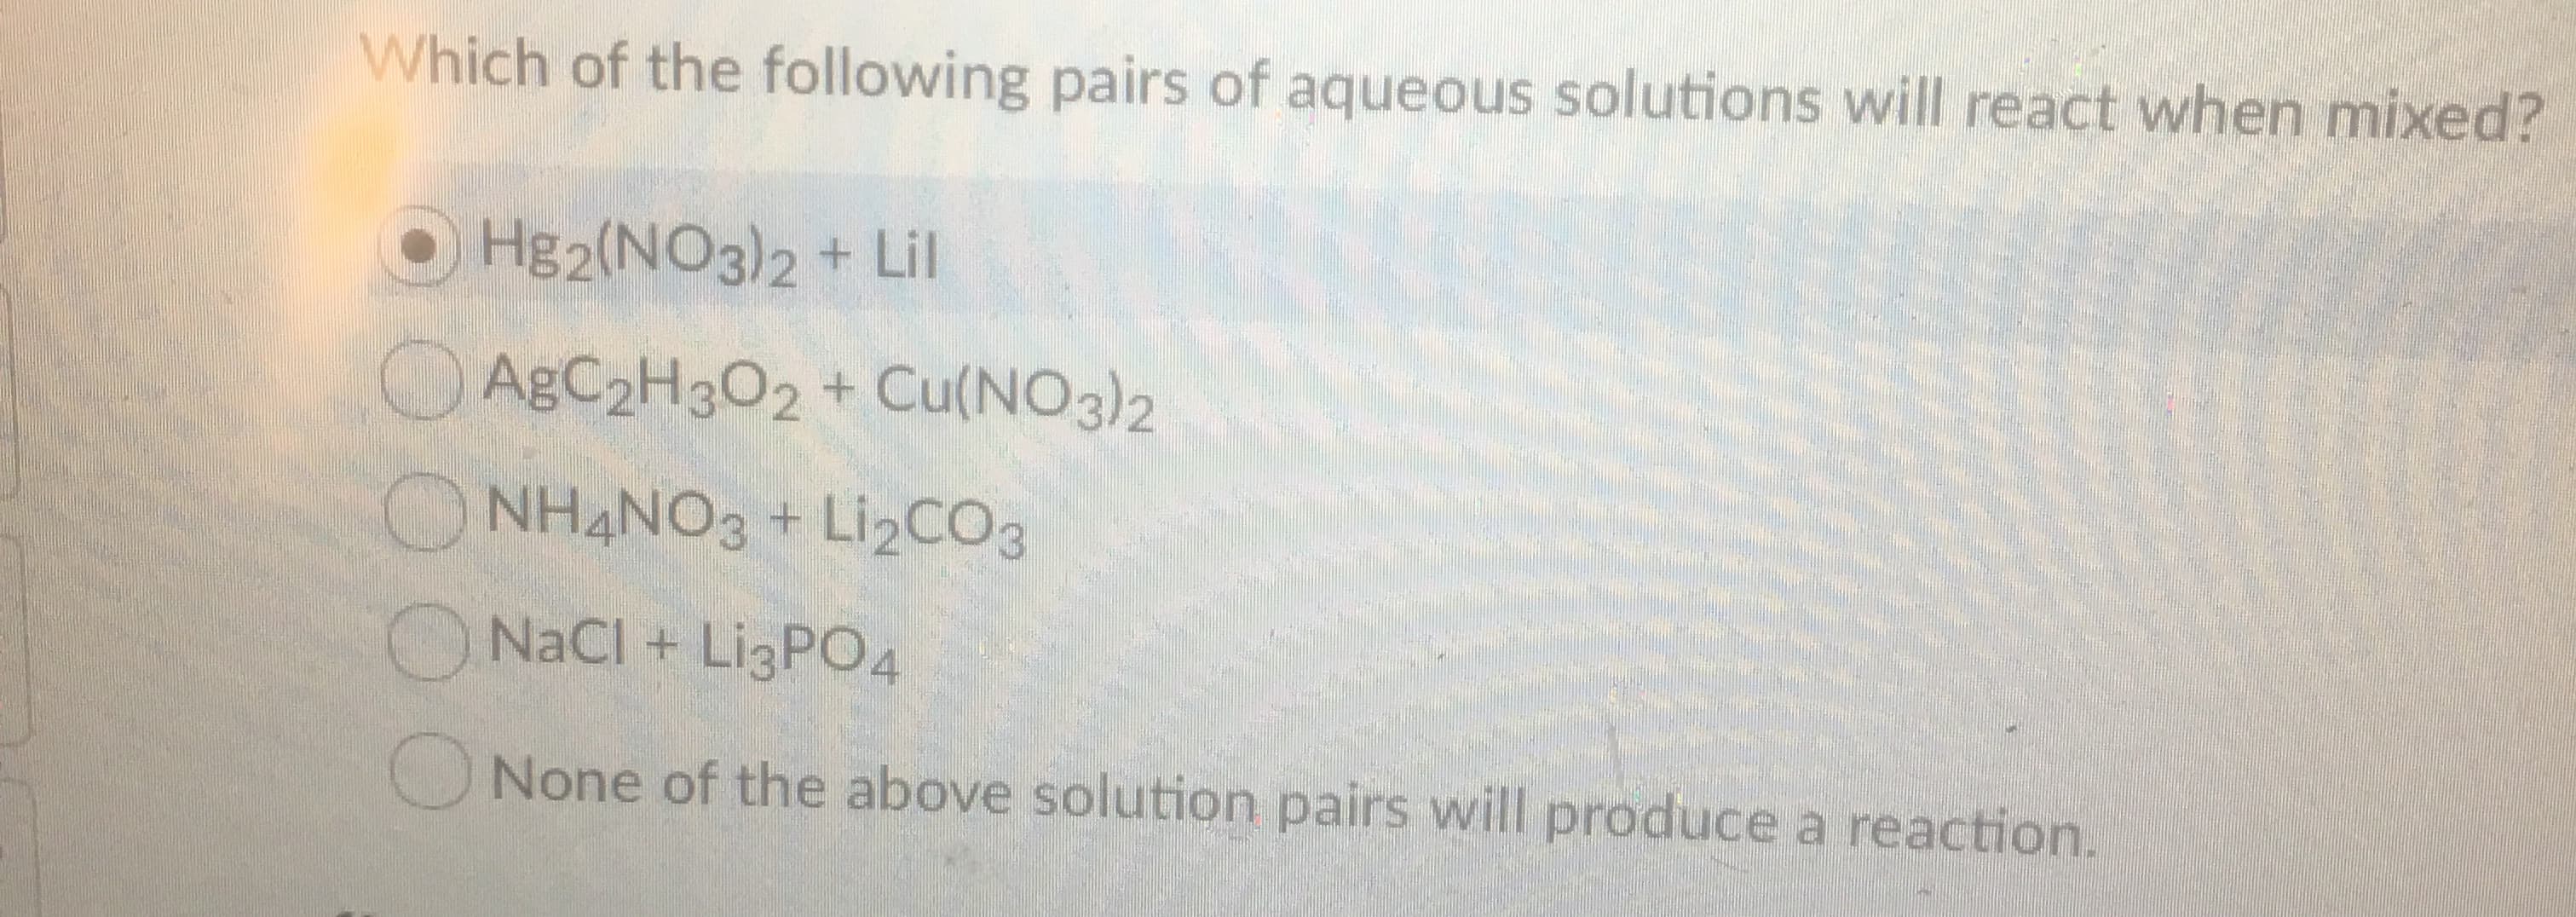 Which of the following pairs of aqueous solutions will react when mixed?
Hg2(NO3)2 + Lil
AgC2H302 + Cu(NO3)2
NH4NO3+ Li2CO3
NaCl + LI3PO4
None of the above solution pairs will produce a reaction.
